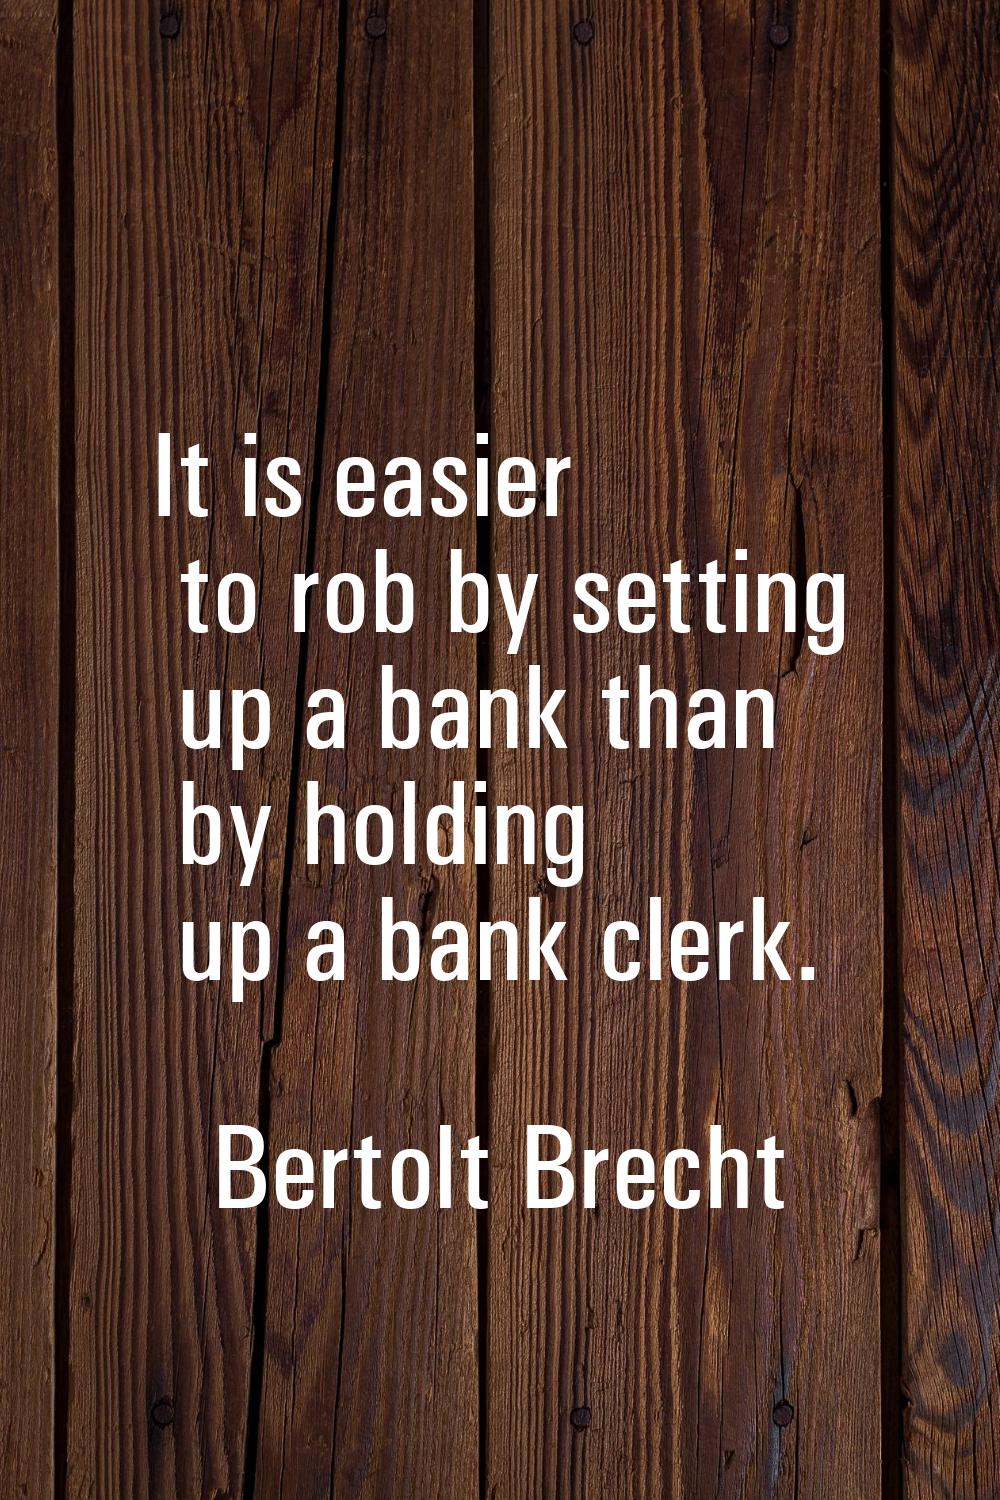 It is easier to rob by setting up a bank than by holding up a bank clerk.